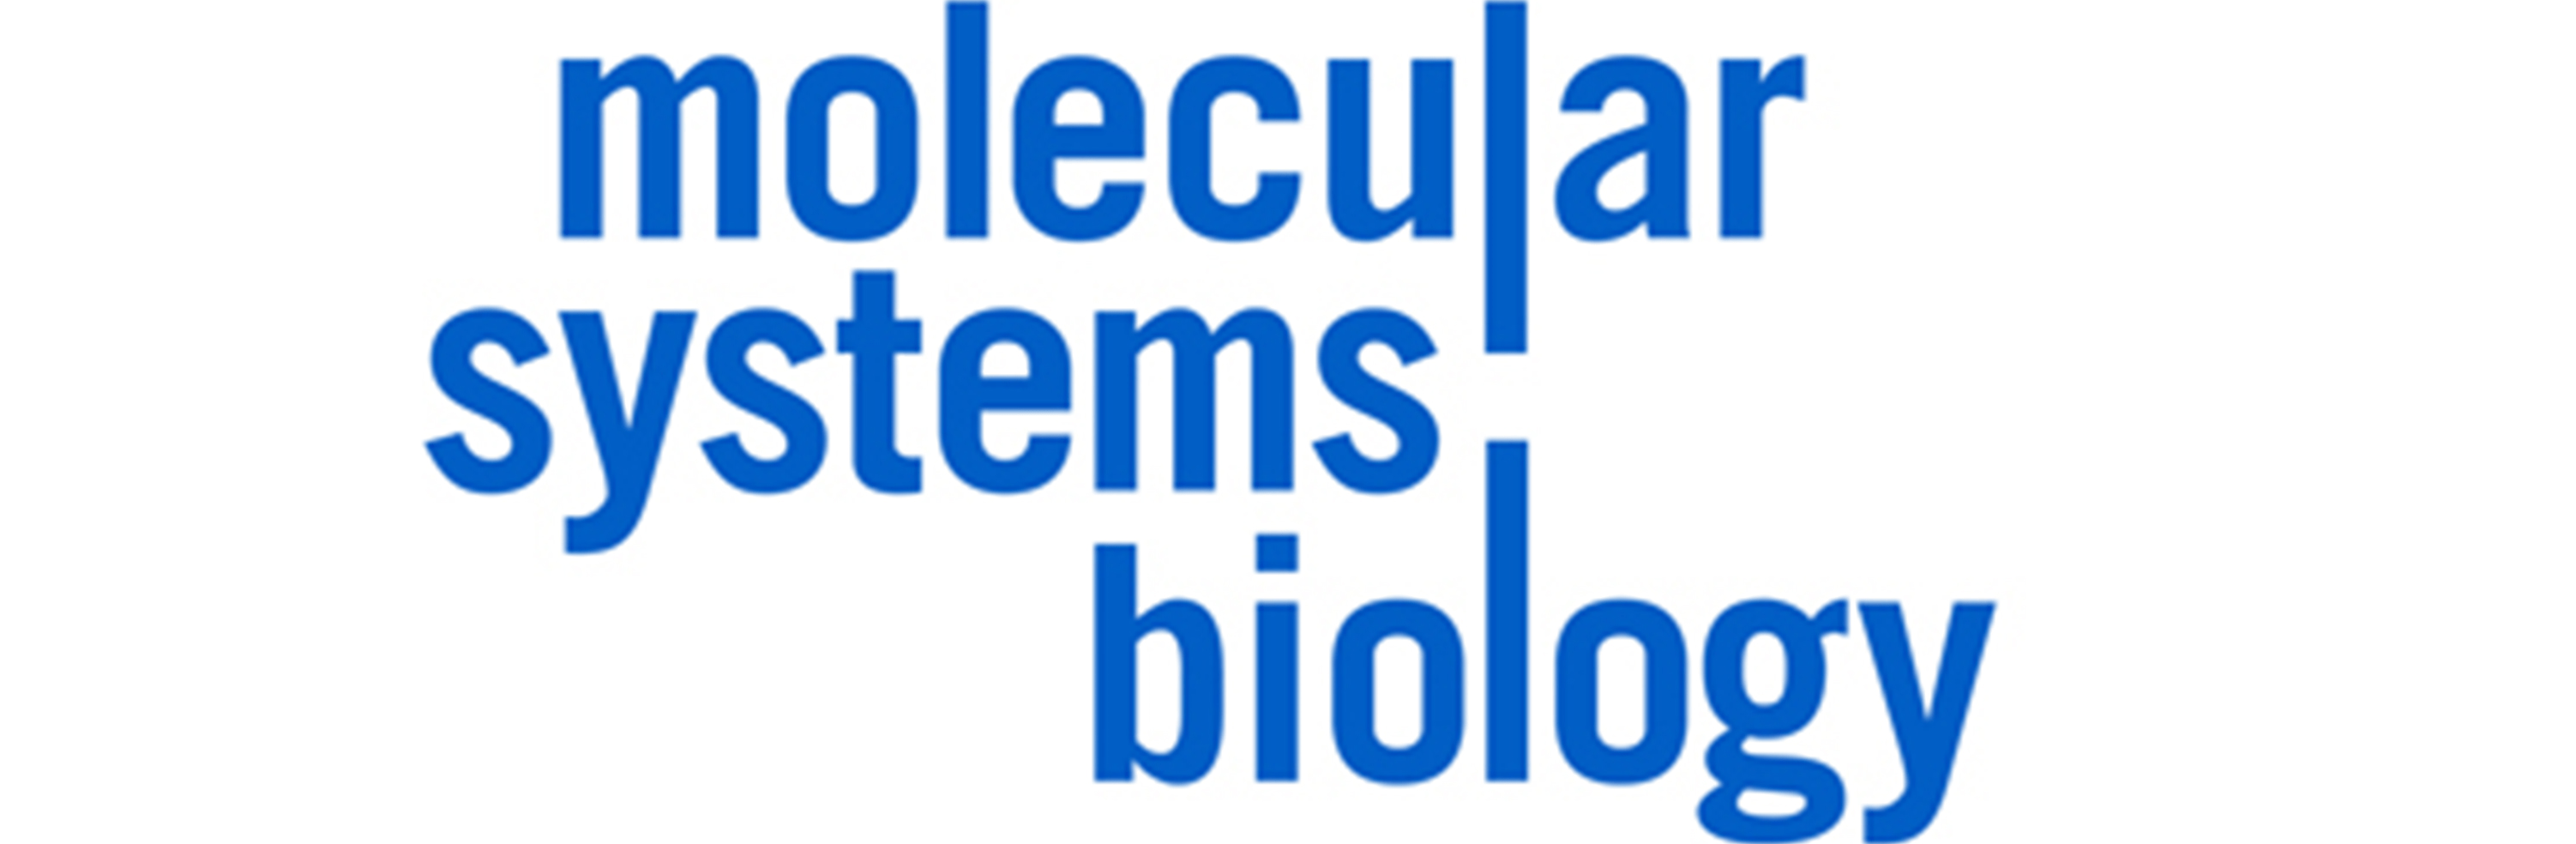 New paper by Francesco Iorio on Molecular Systems Biology